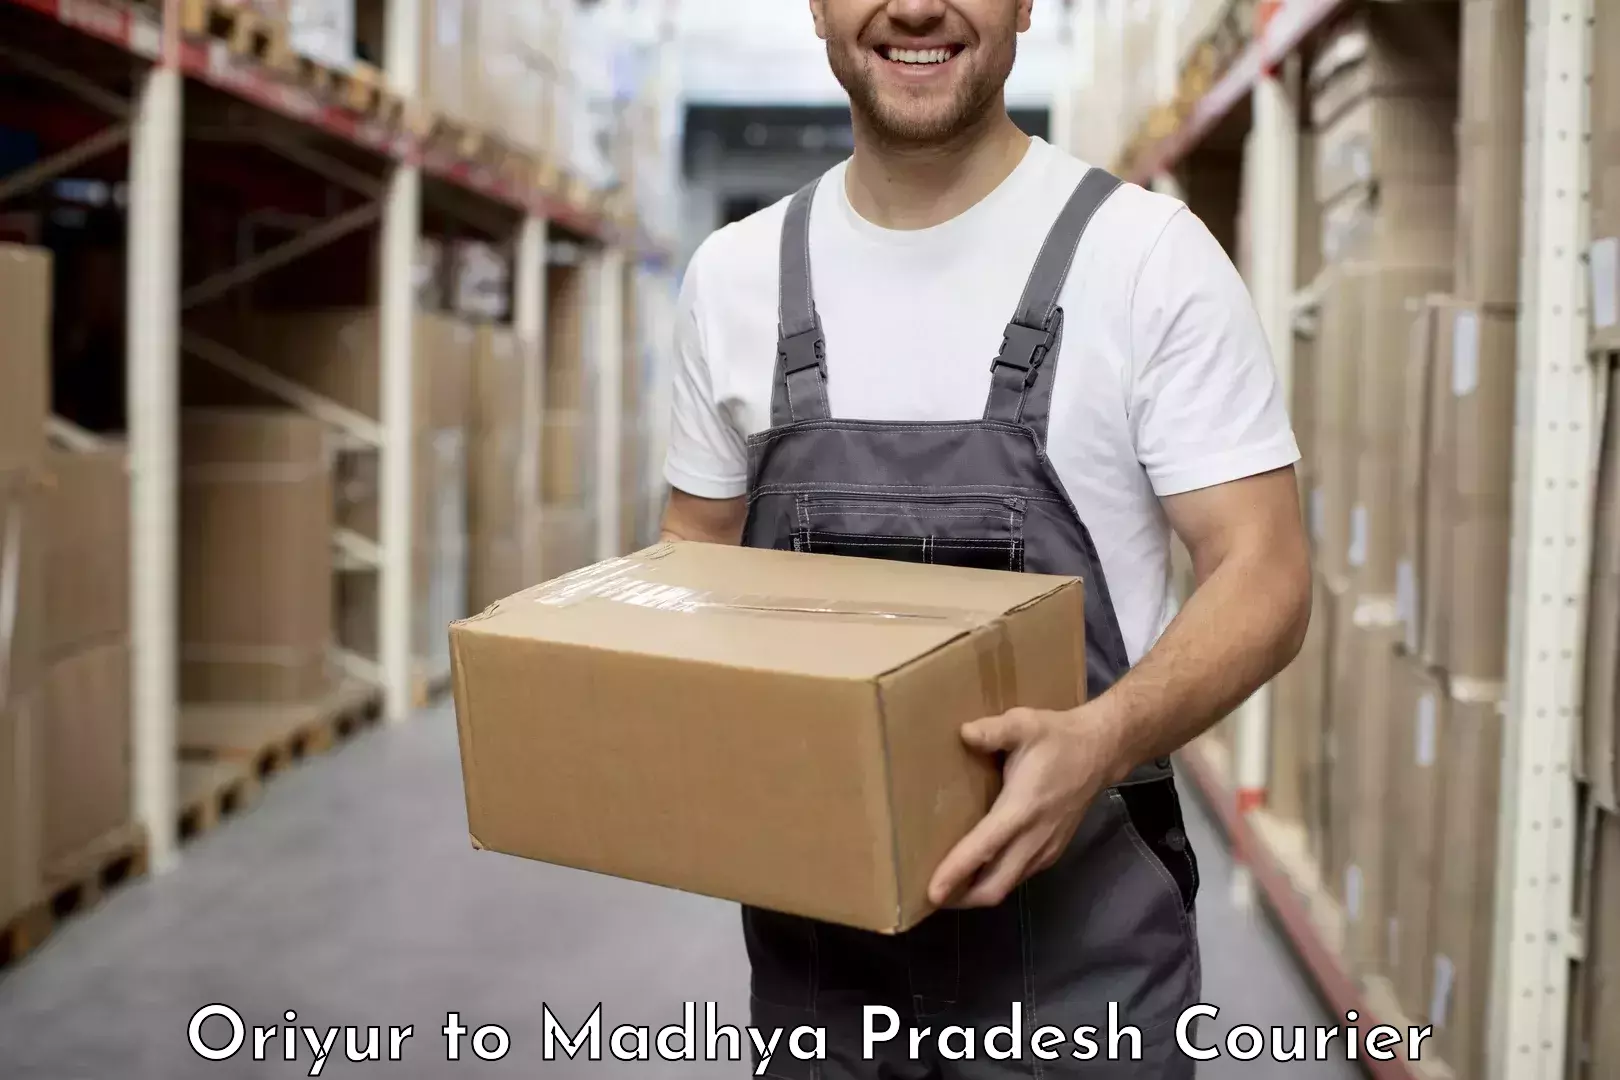 Personal courier services Oriyur to Gwalior